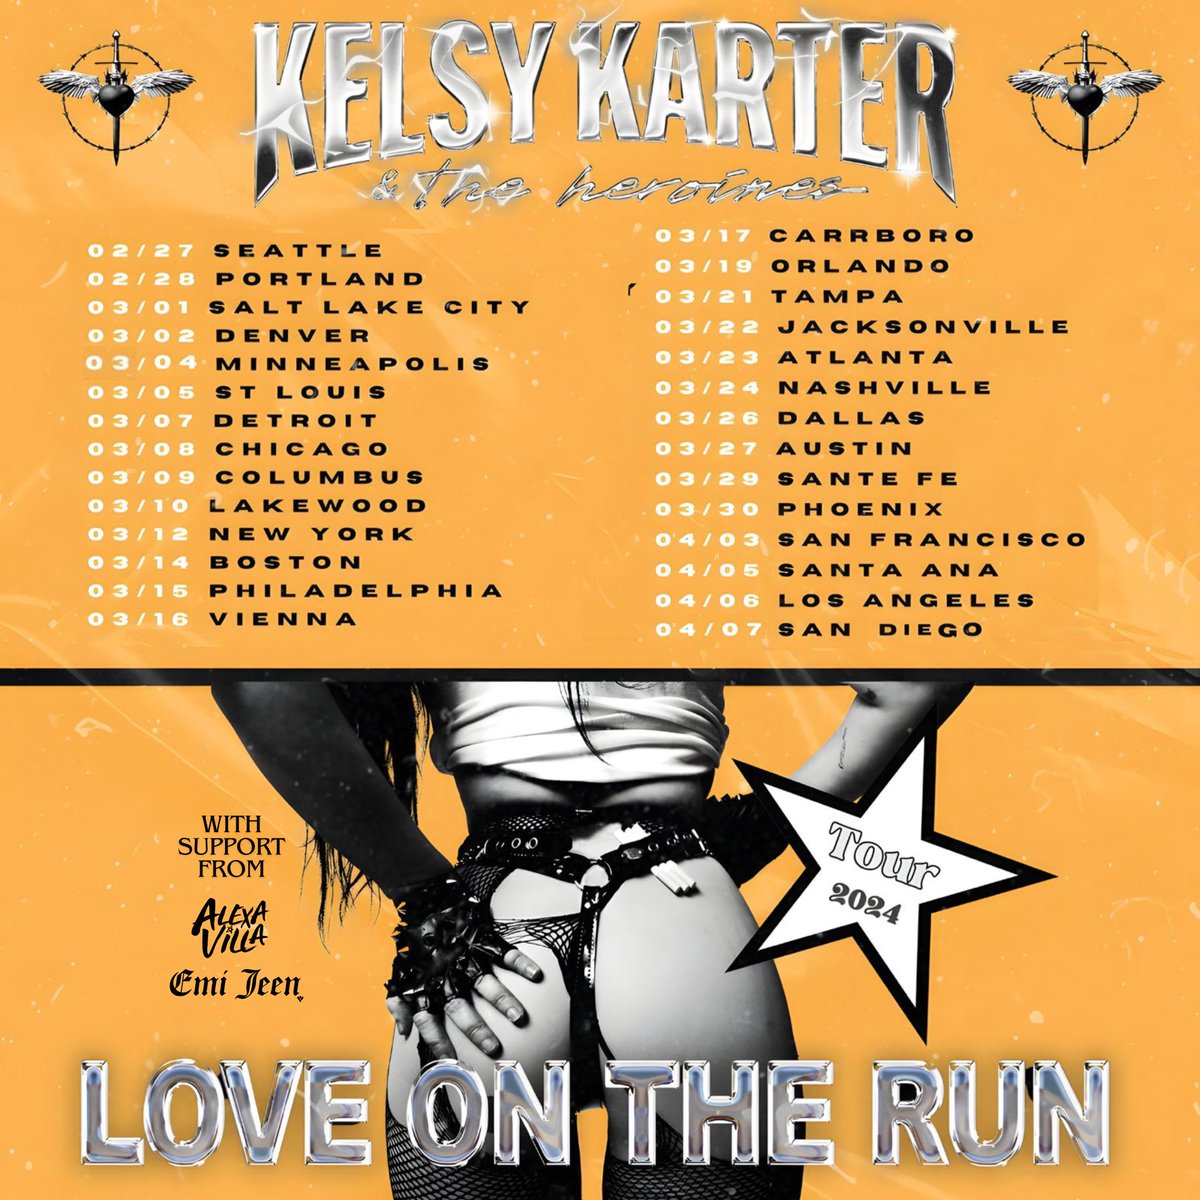 US TOUR STARTS THIS MONTH!!! Get your tickets and VIP upgrades kelsykarterandtheheroines.com ROCK N ROLL!